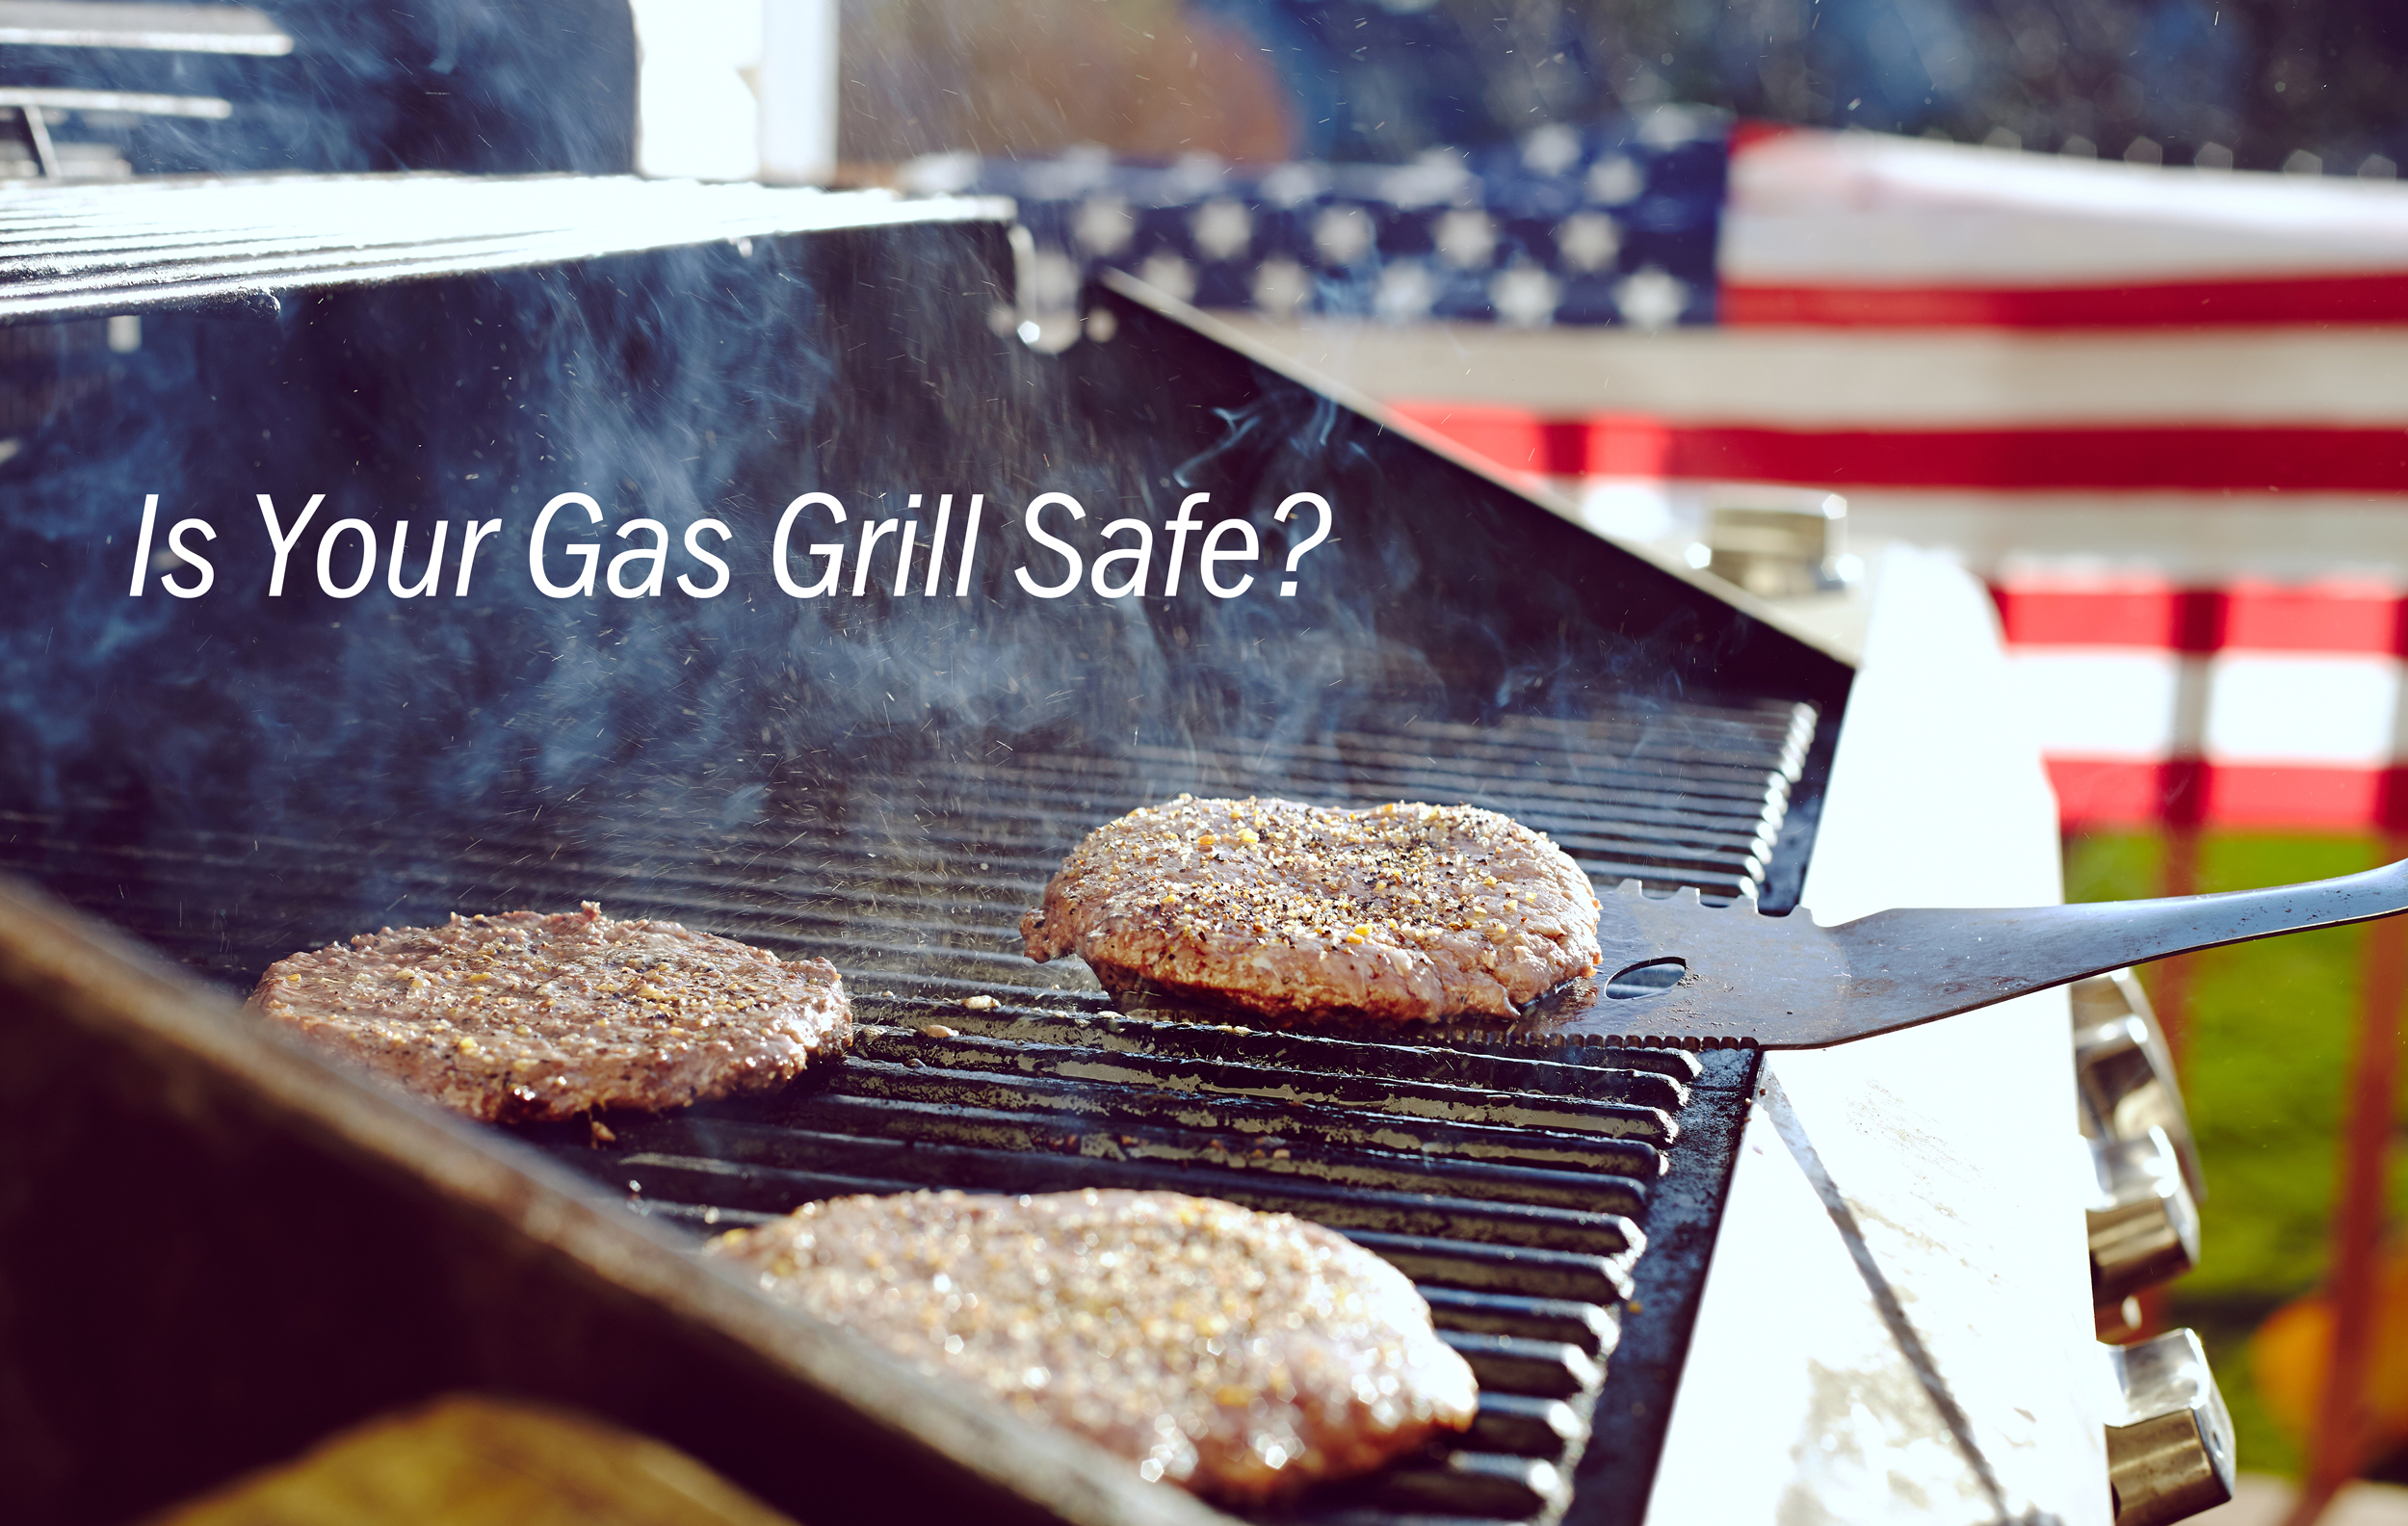 Forward Mutual encourages safe cooking over gas grill for Independence Day